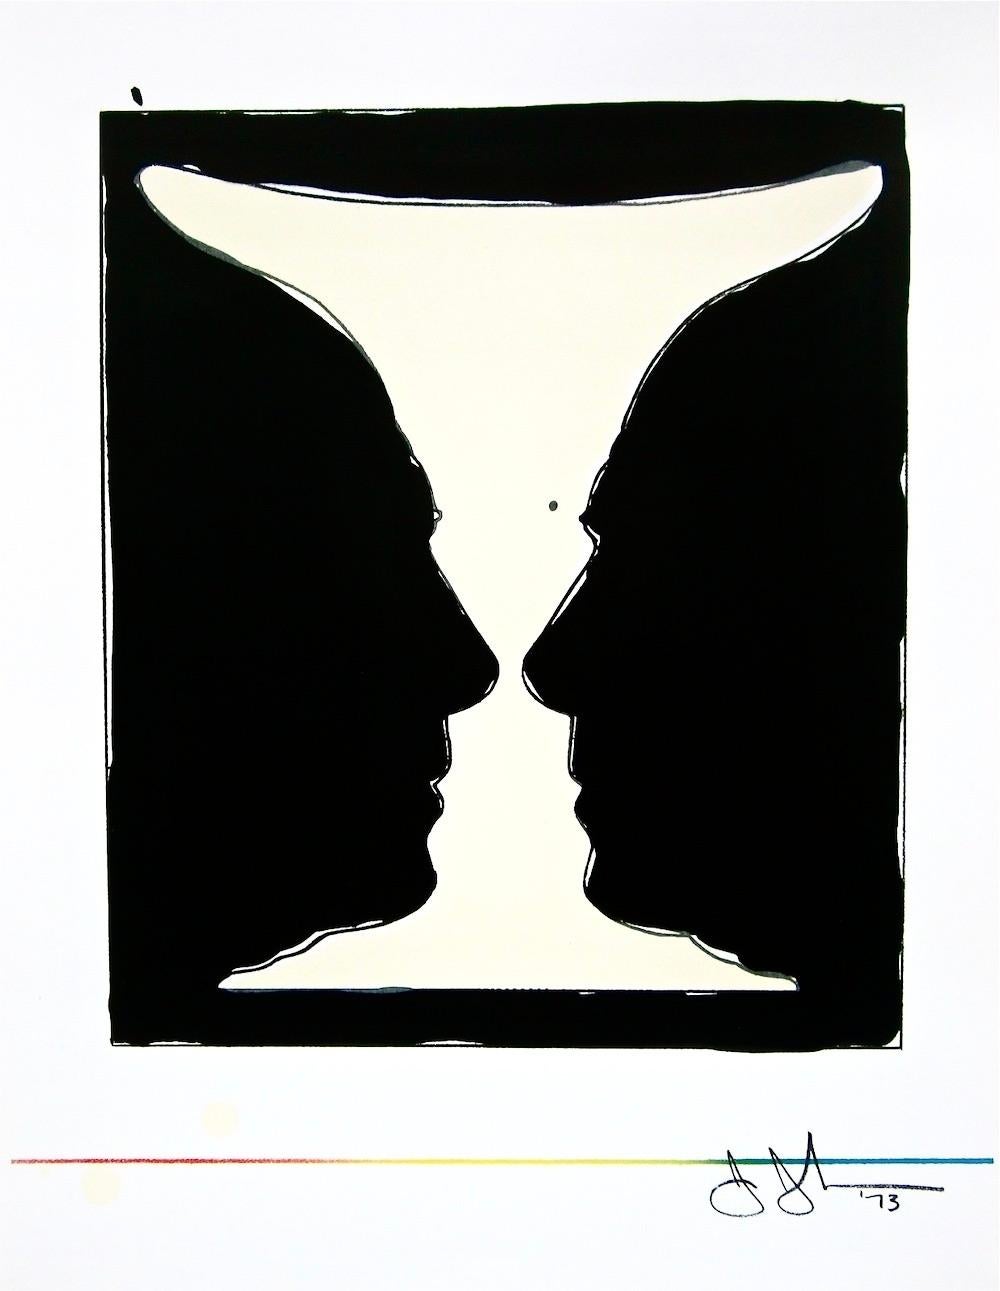 Artist: Jasper Johns (1930)
Title: Cup 2 Picasso (Sparks 113; Field 168; ULAE 123)
Year: 1973
Medium: Color lithograph on wove paper
Edition: 1,500
Size: 14 x 10.5 inches
Inscription: Signed & dated with the artist's plate-signed